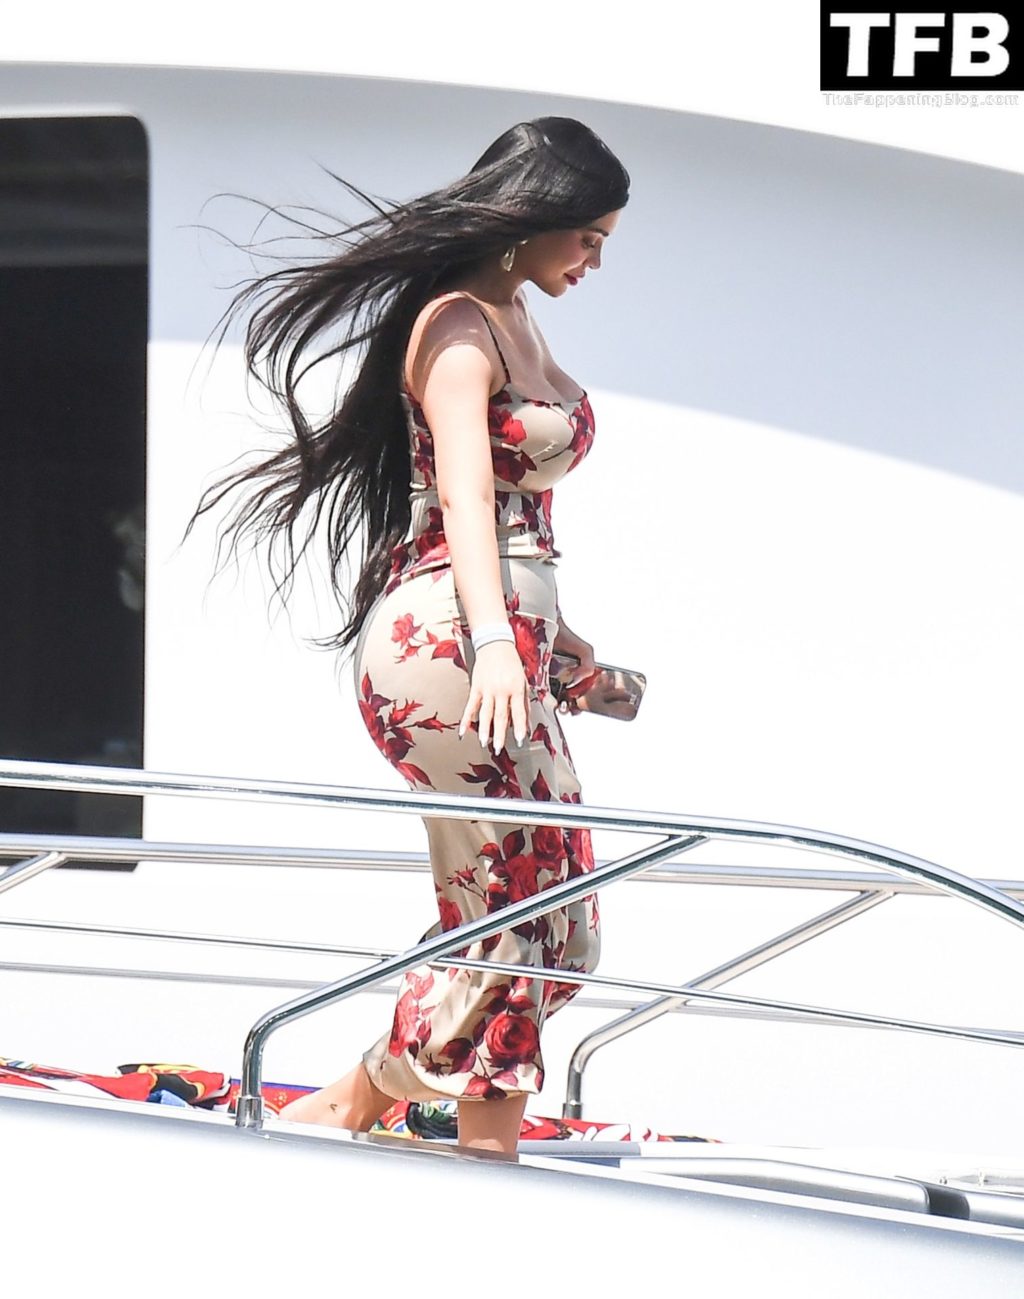 Kylie Jenner Sexy The Fappening Blog 24 1024x1299 - Kylie Jenner Flaunts Her Curves in Portofino (32 Photos)